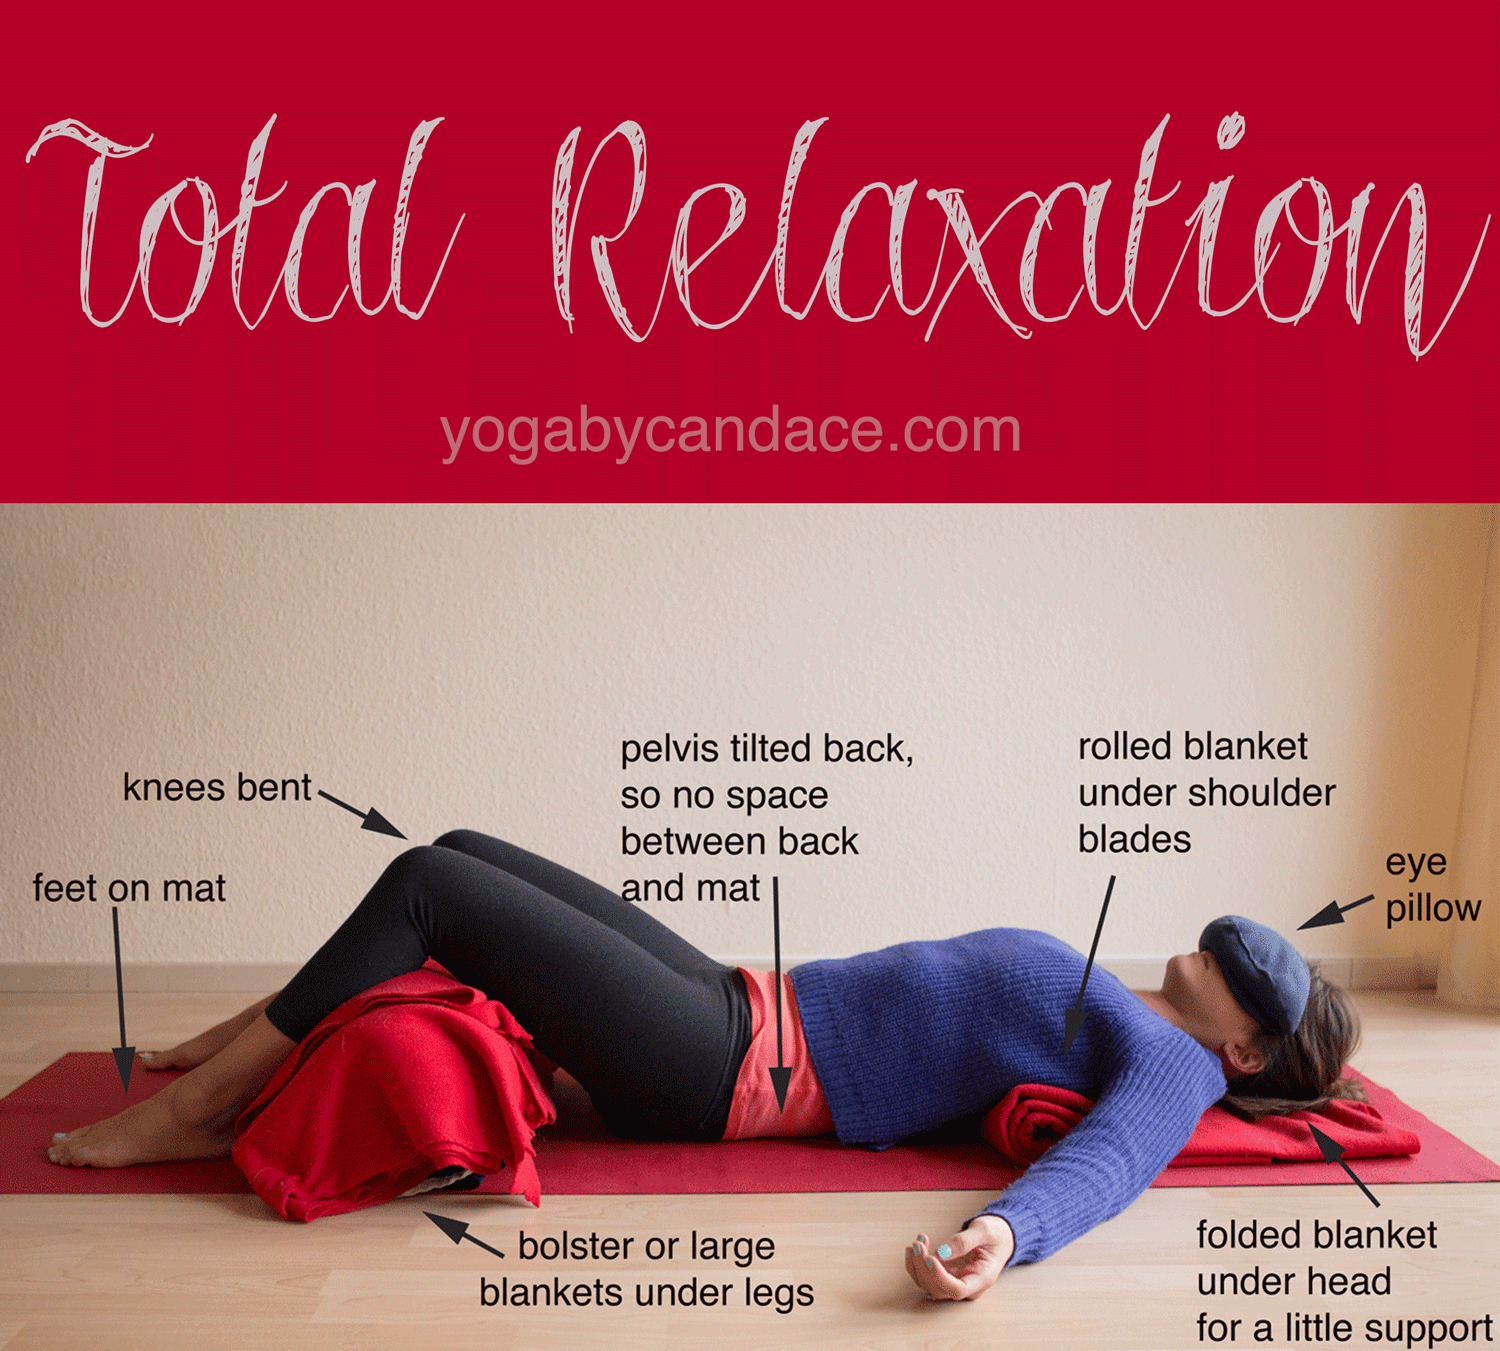 8 Best Restorative Yoga Poses To Melt Stress Right Now